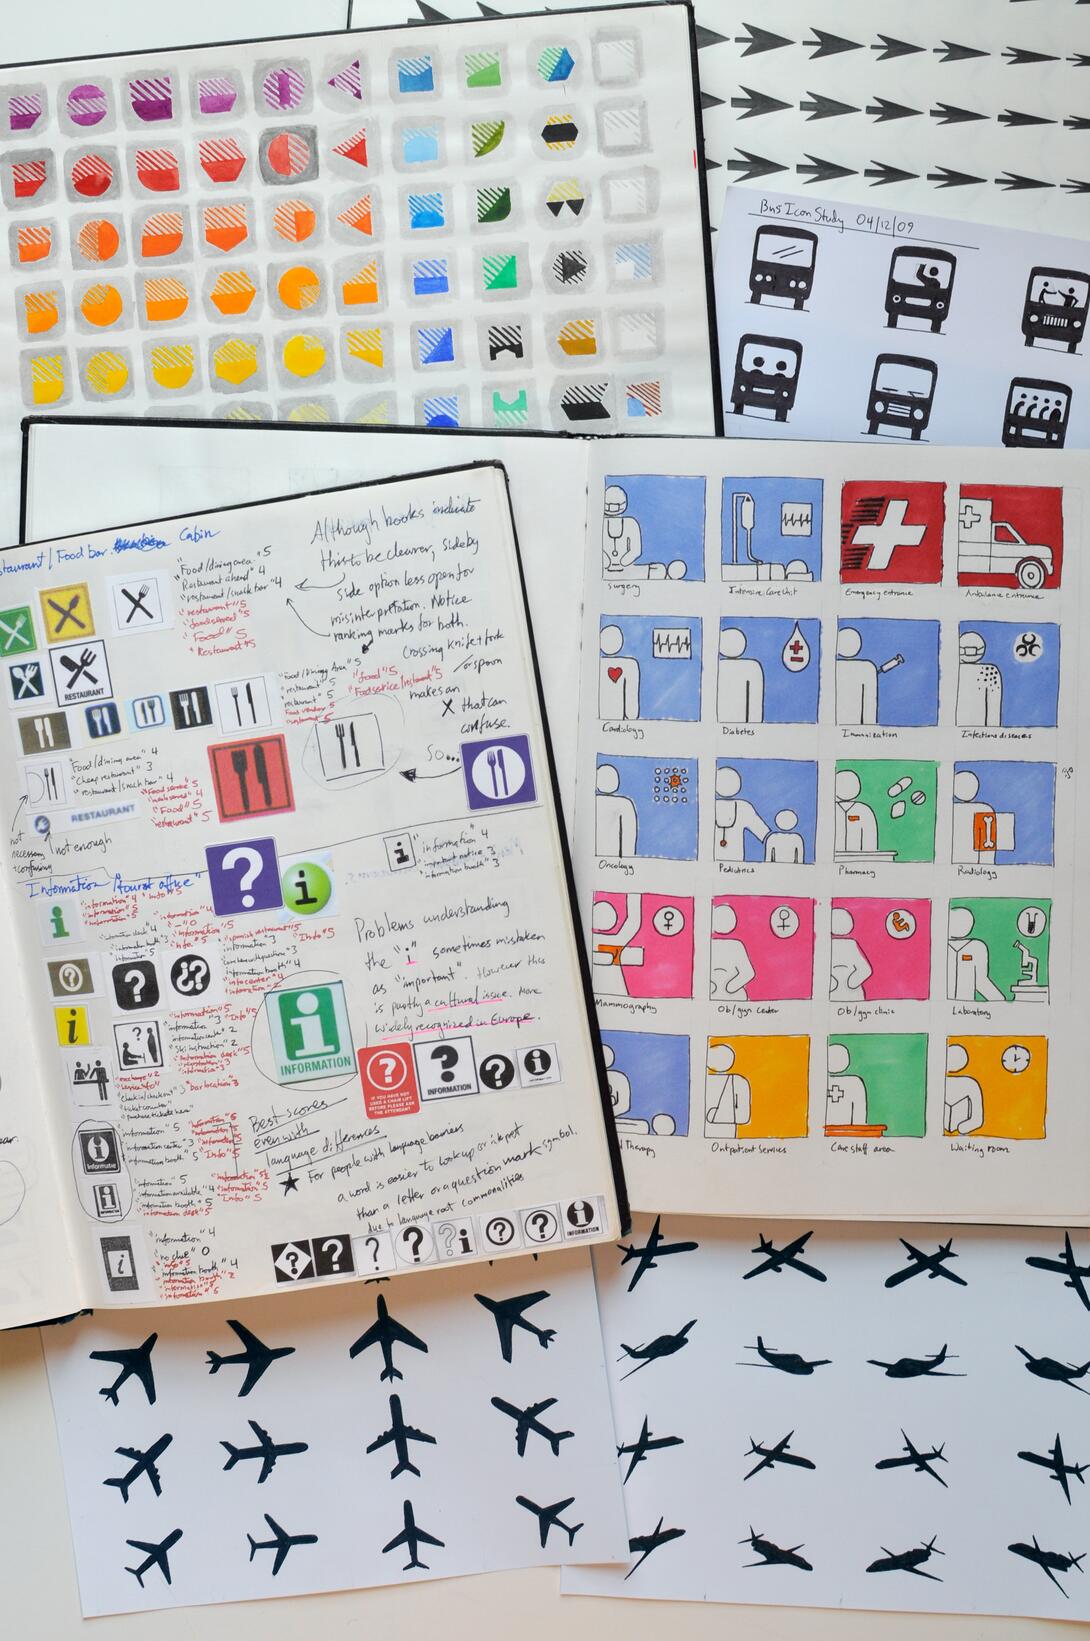 photograph of open sketchbooks with icons and colorful symbols arranged in rows - drawn by William Bardel